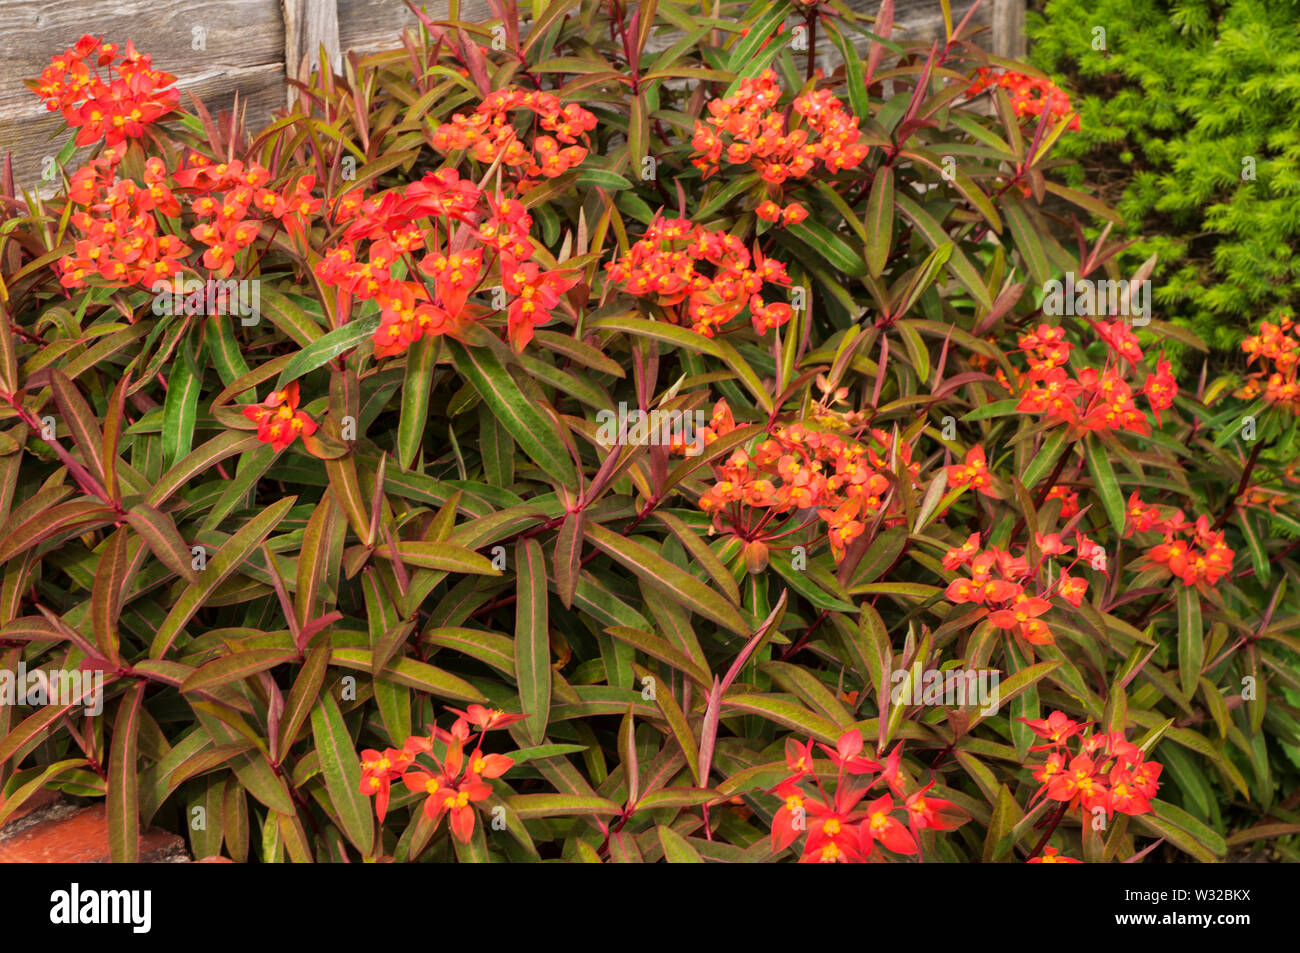 Euphorbia griffithii Fireglow with orange-red involucres and yellow cvathia also green leaves some with red midribs turning red and yellow in autumn Stock Photo